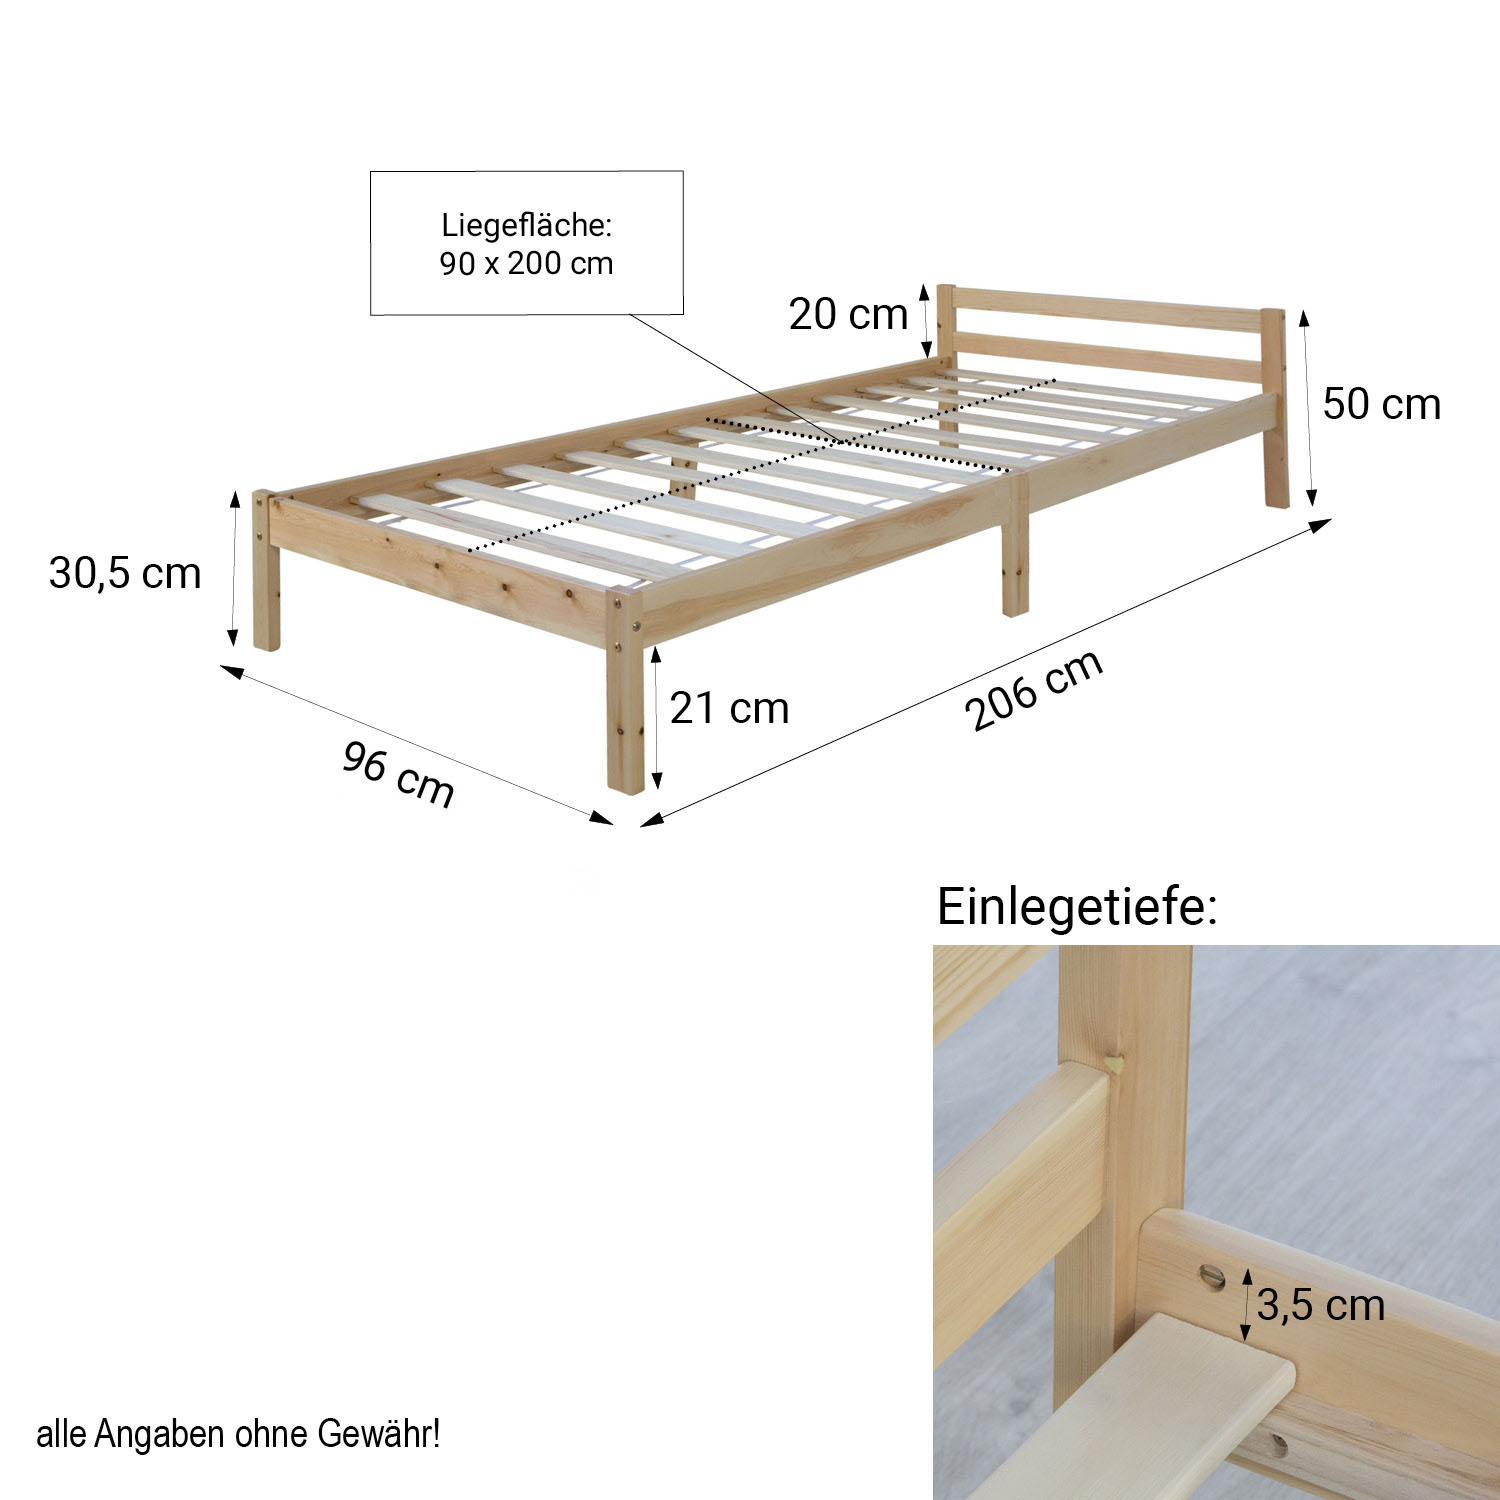 Wooden bed youth bed 90 140 x 200 cm natural white with slatted frame children's bed day frame